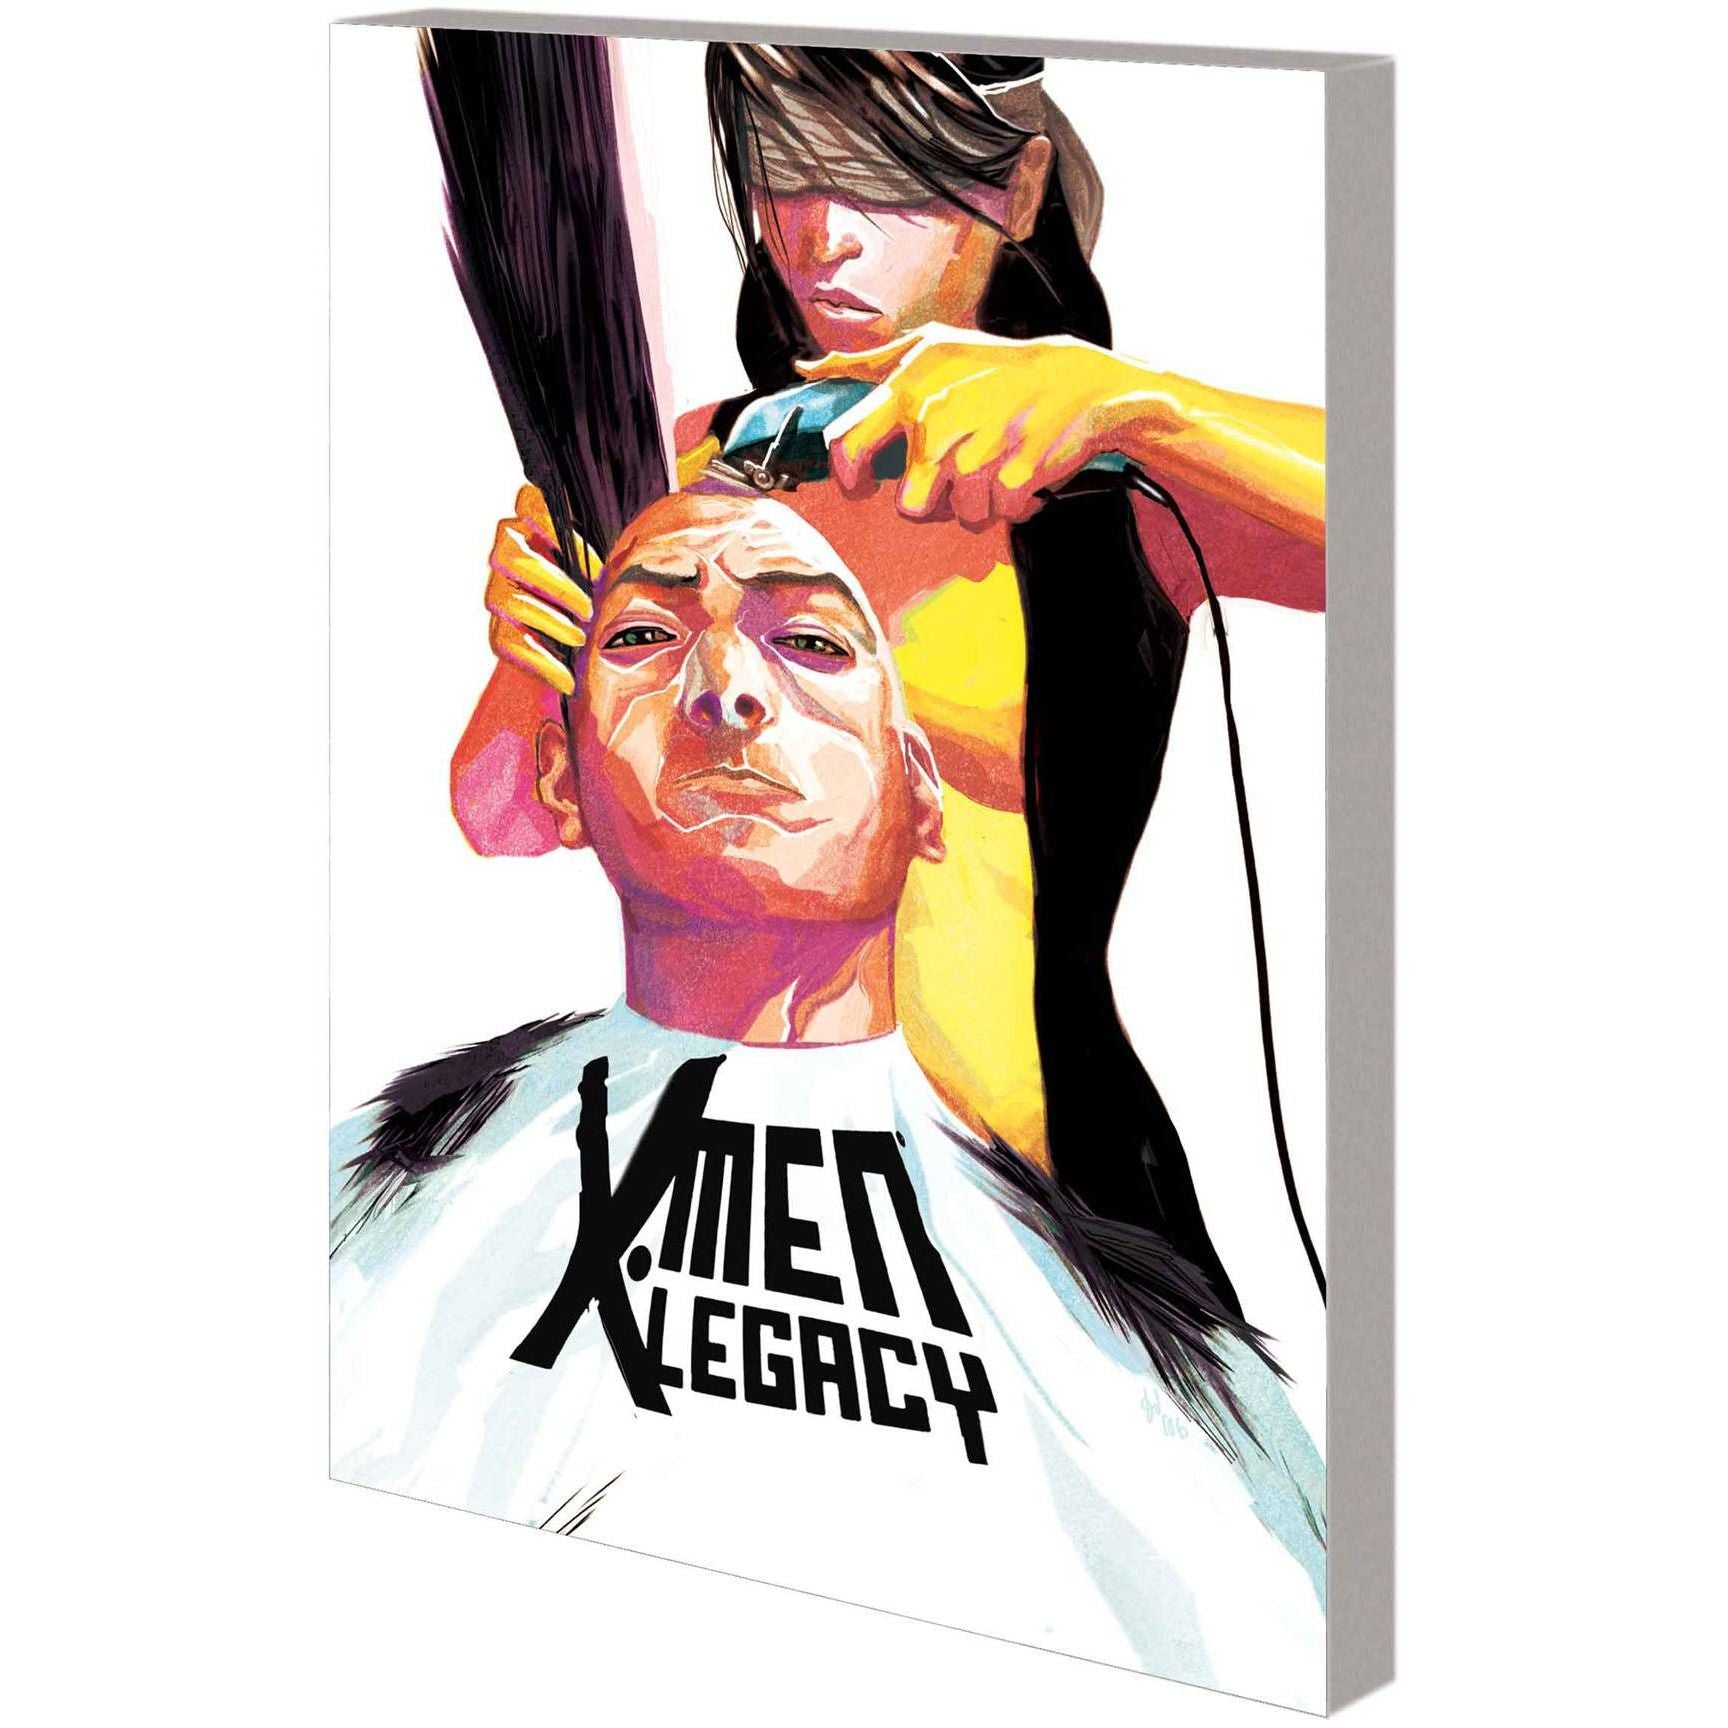  X-Men Legacy: For We Are Many Vol. 4 TP Uncanny!